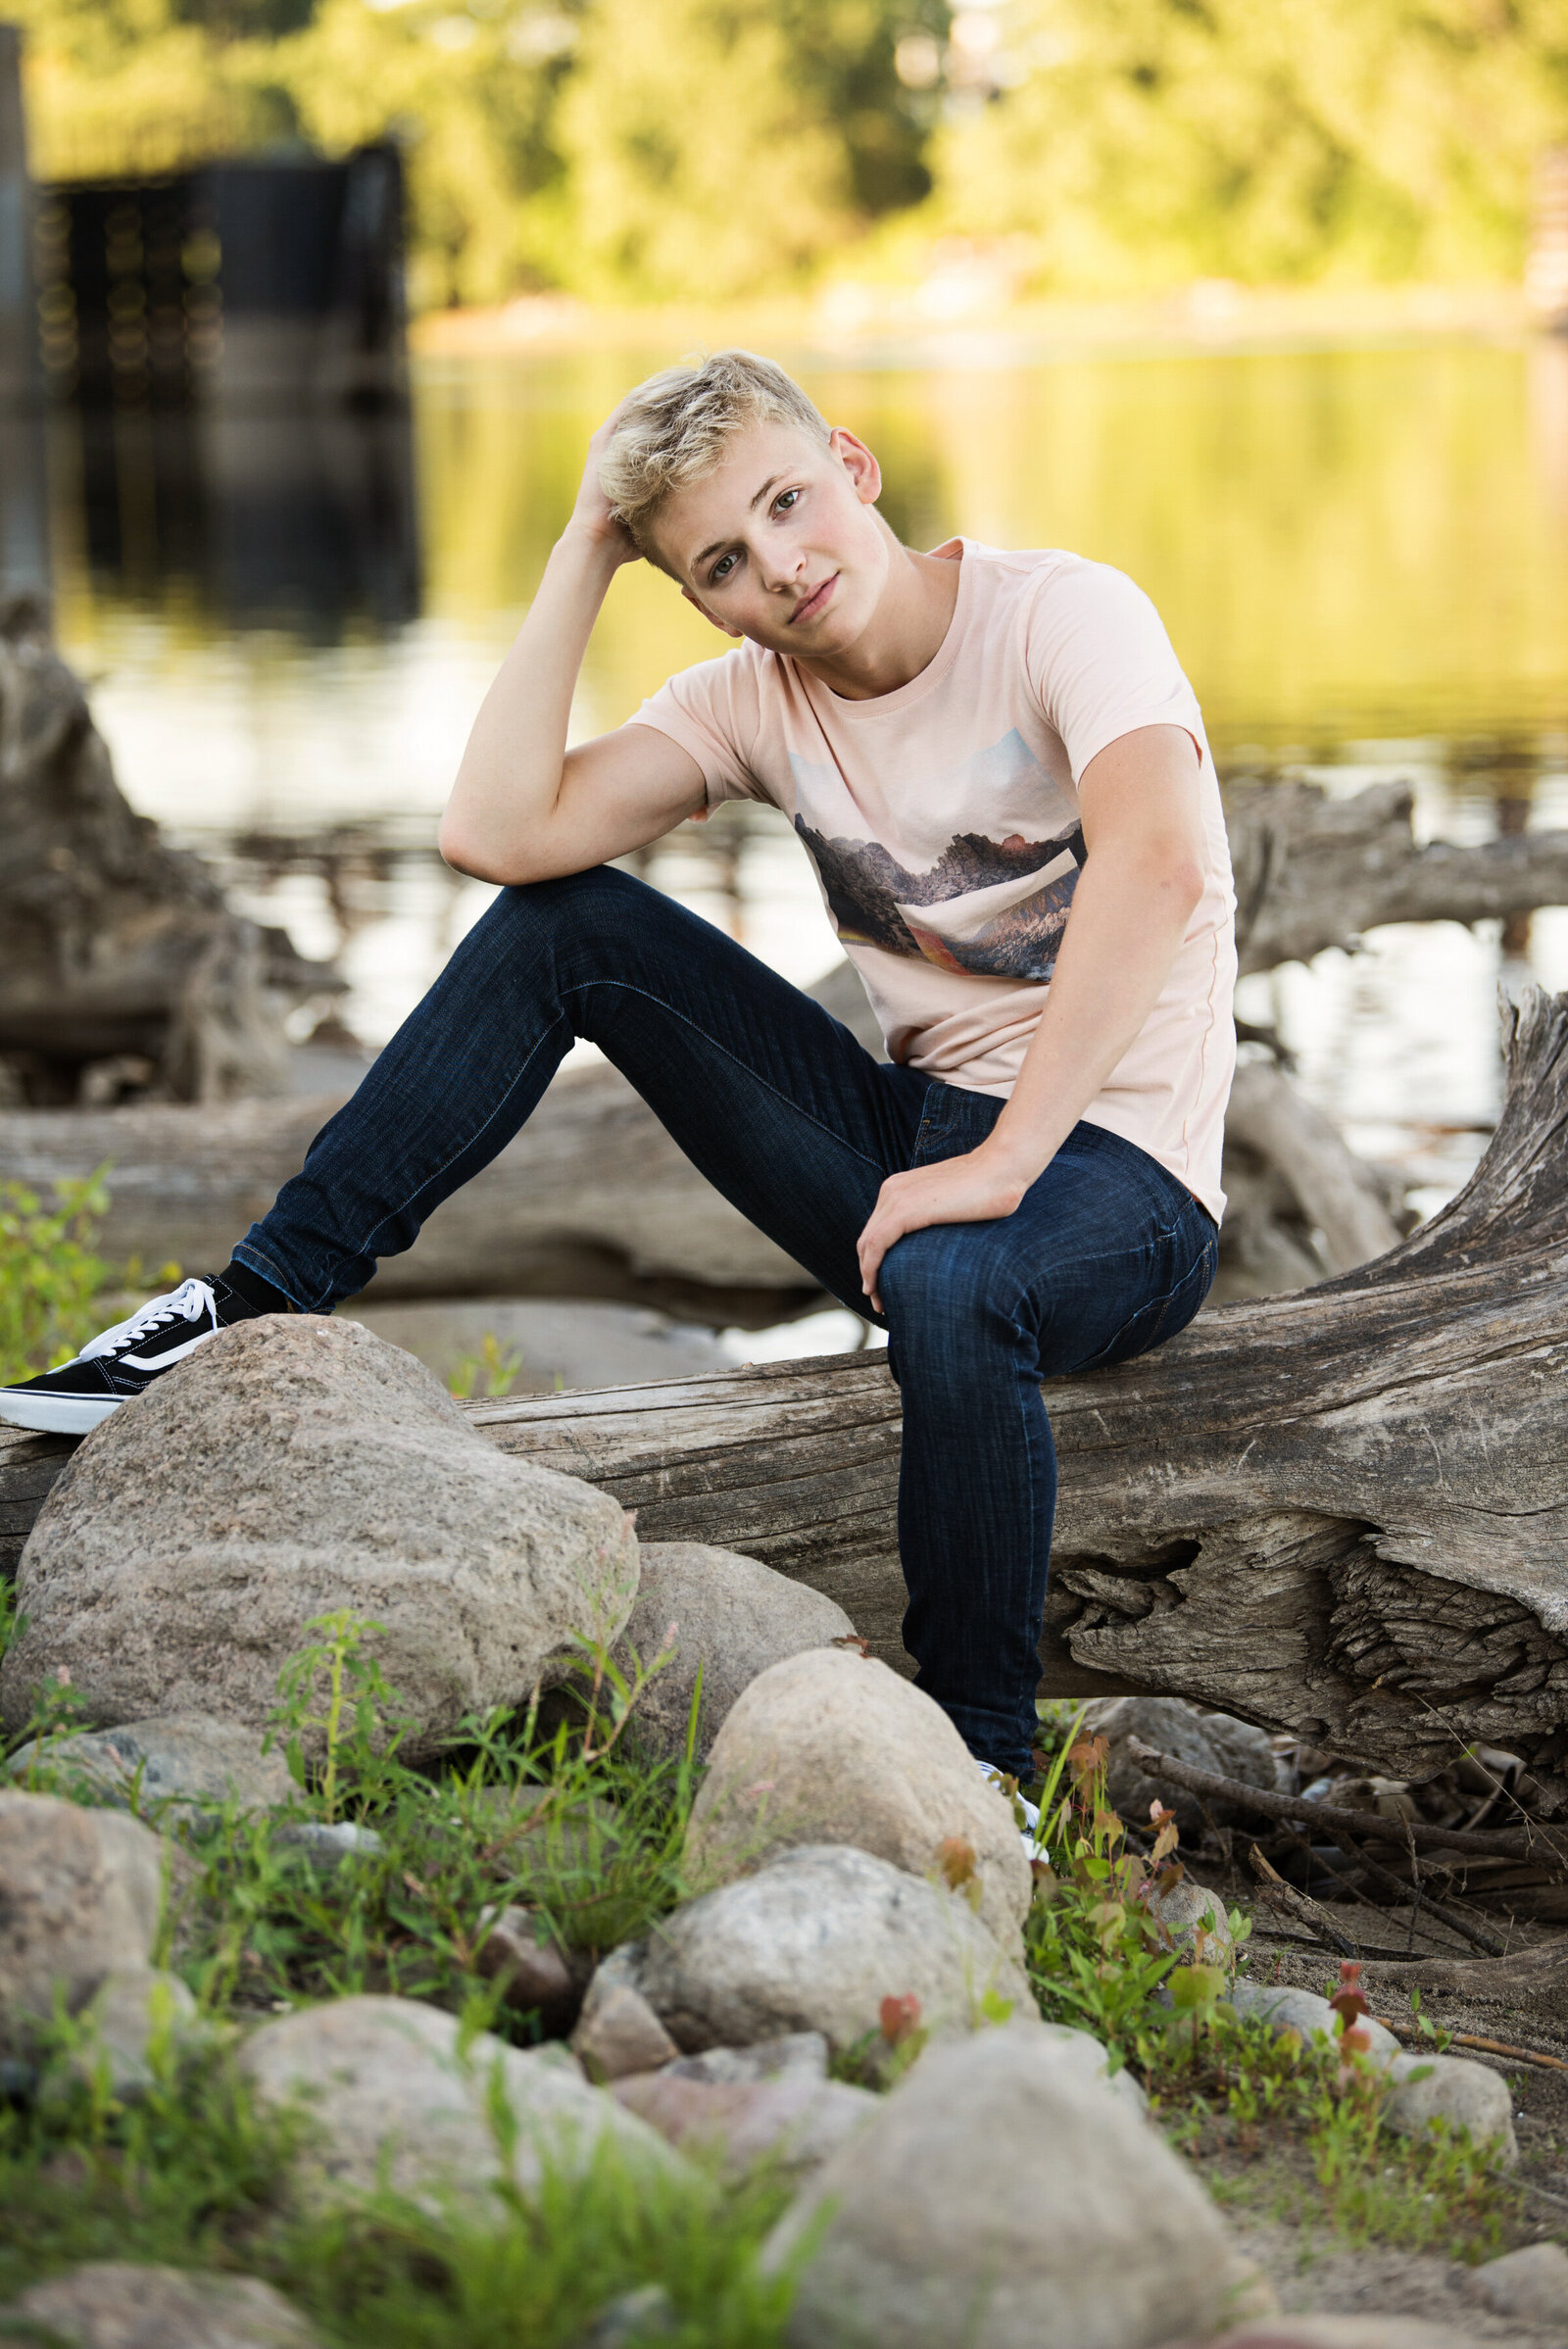 Mounds View Minnesota high school senior boy wearing a casual outfit sitting in nature